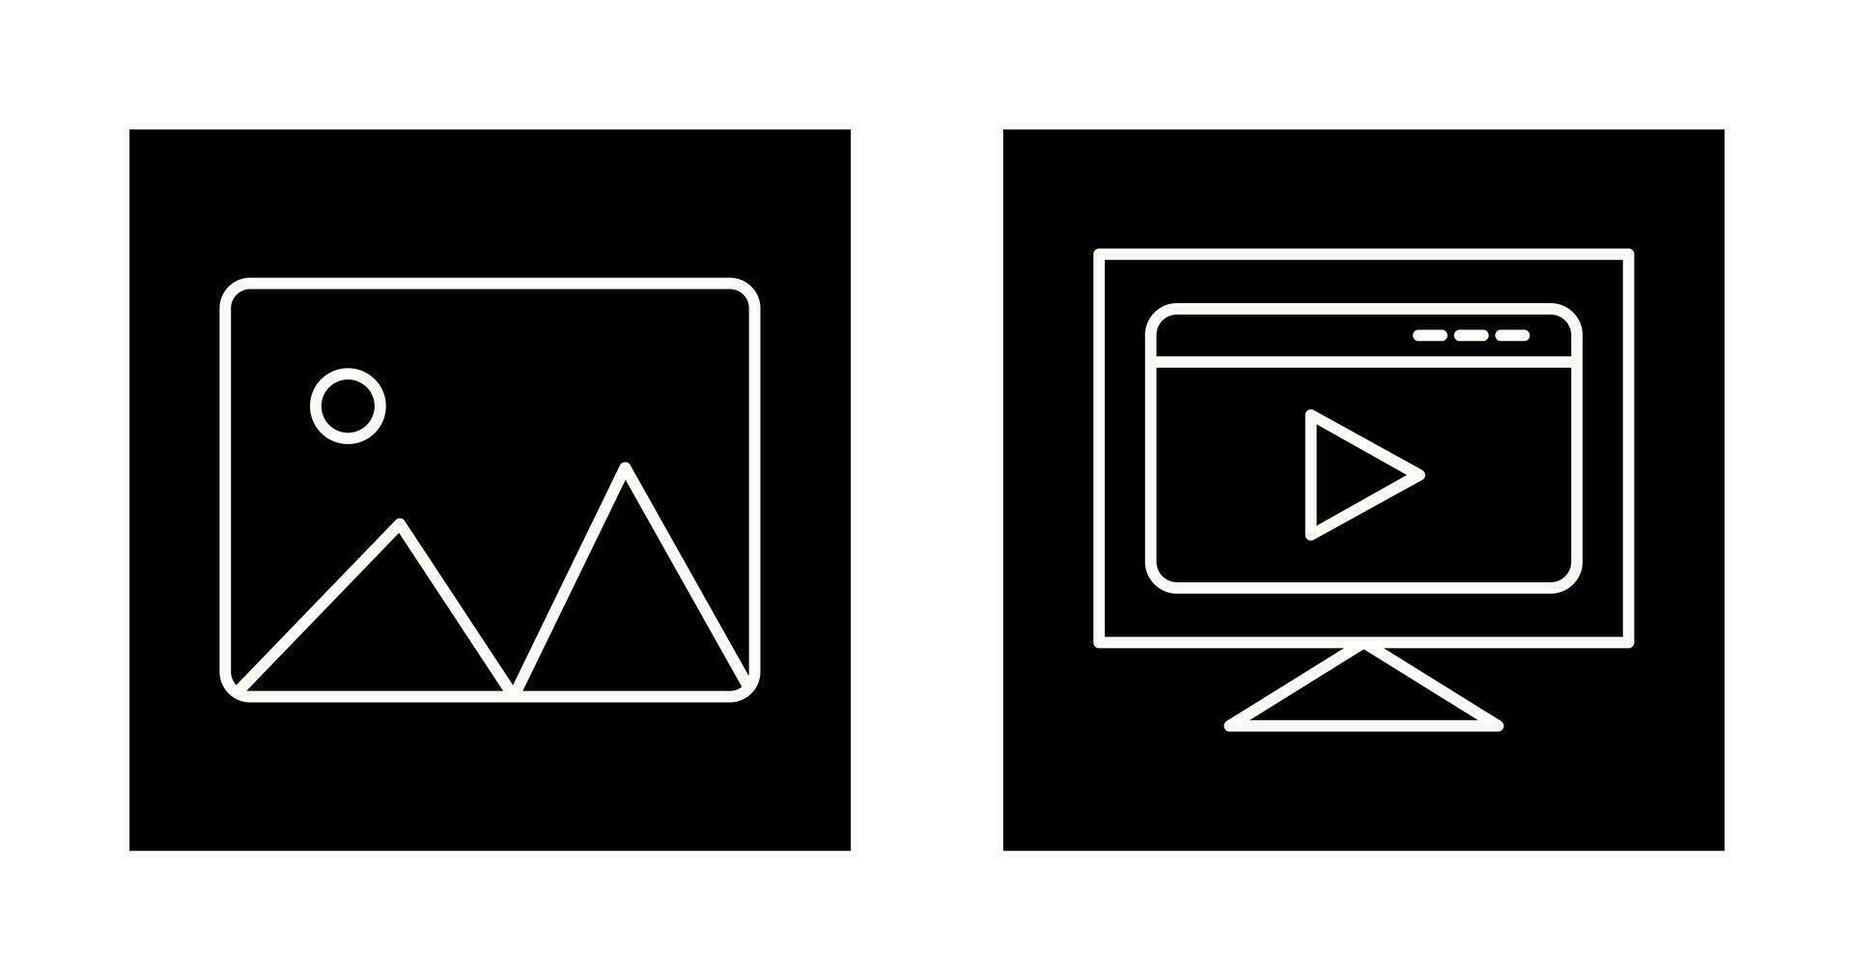 albums and video streaming Icon vector